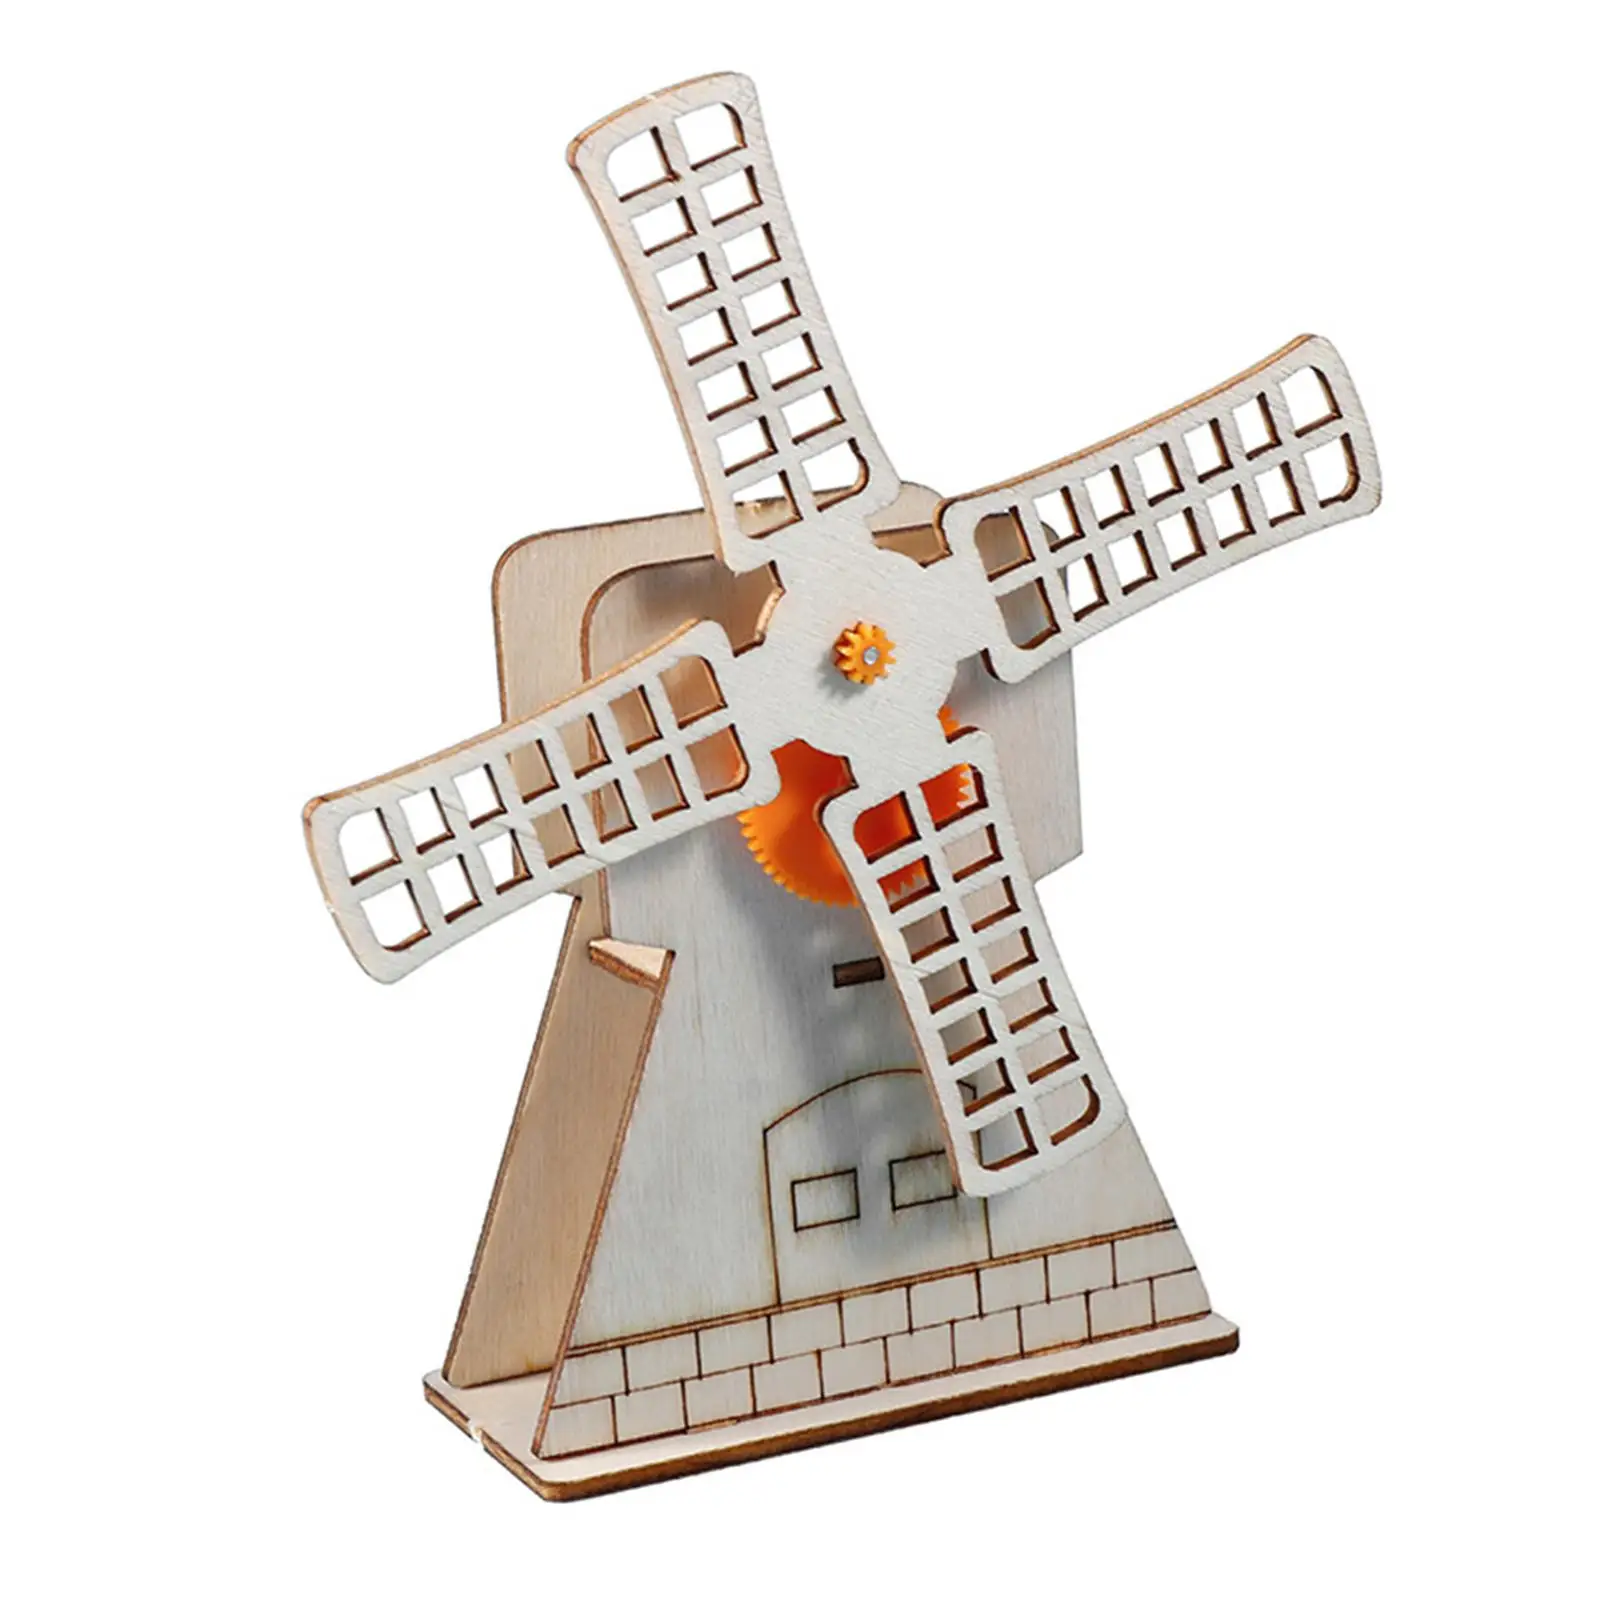 Windmill Wooden House Technology Small Production Science Experiment Teaching Toy Ornaments Windmill Model Kit for Kid Gifts